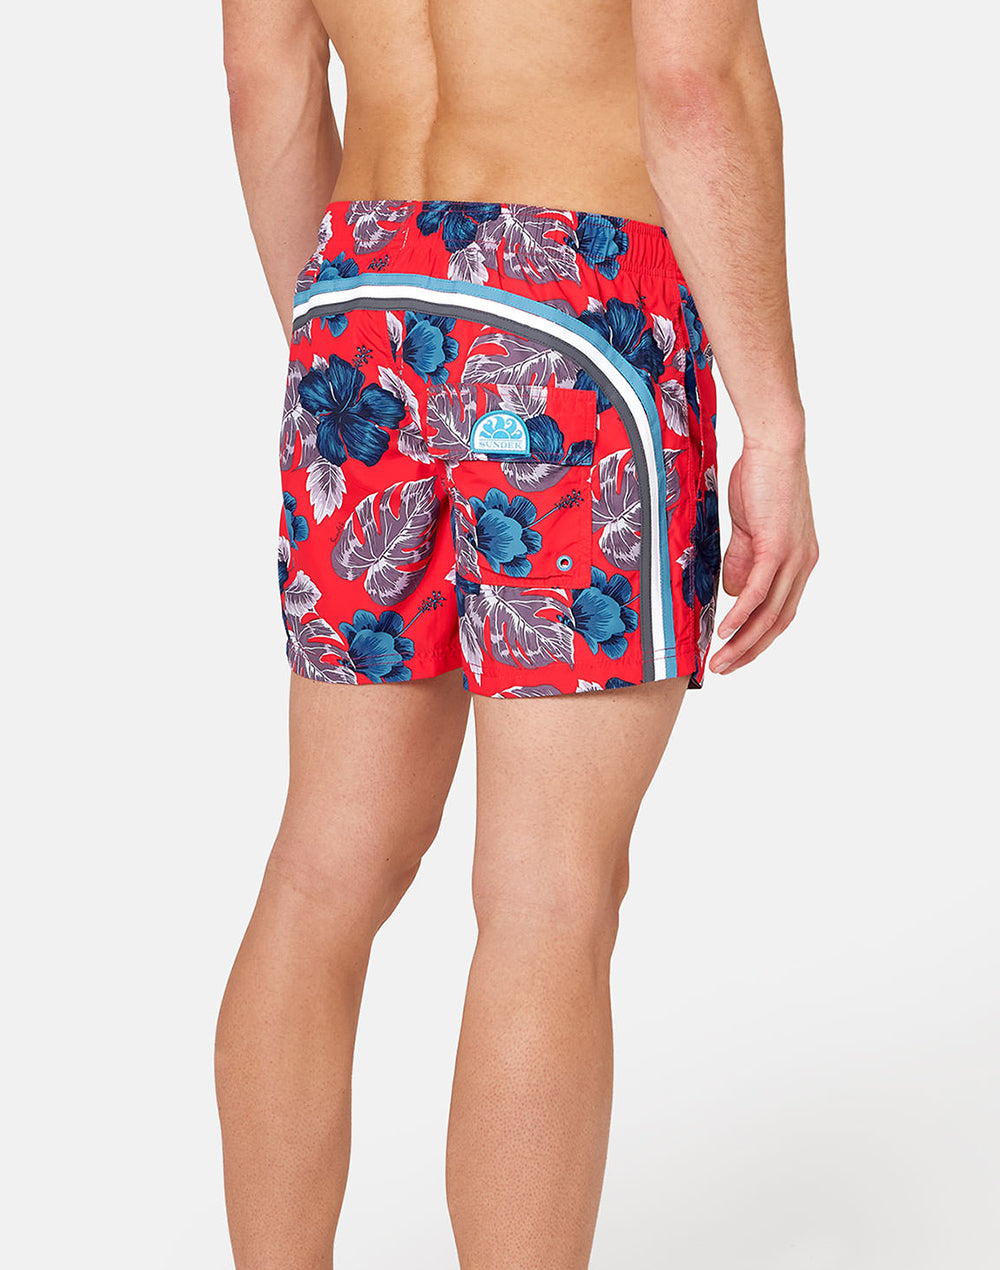 REPREVE® ELASTICATED WAIST SHORT SWIMSUIT WITH PRINT